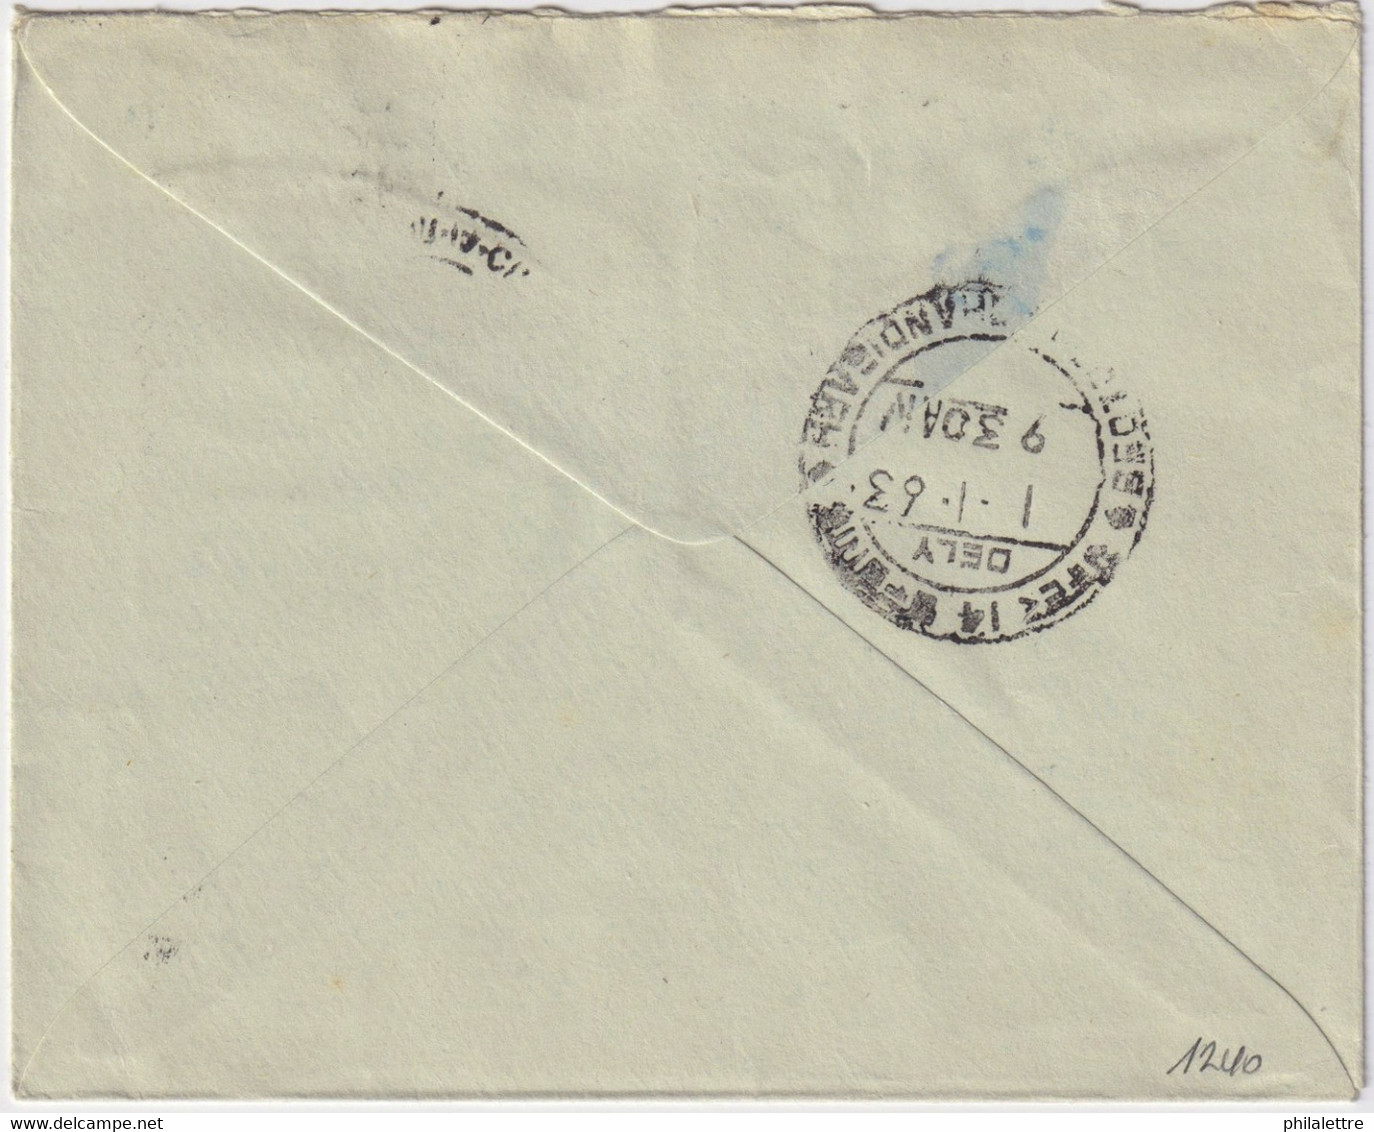 INDE / INDIA - 1962 - Fine Postal Envelope Used Locally In CHANDIGARH - Covers